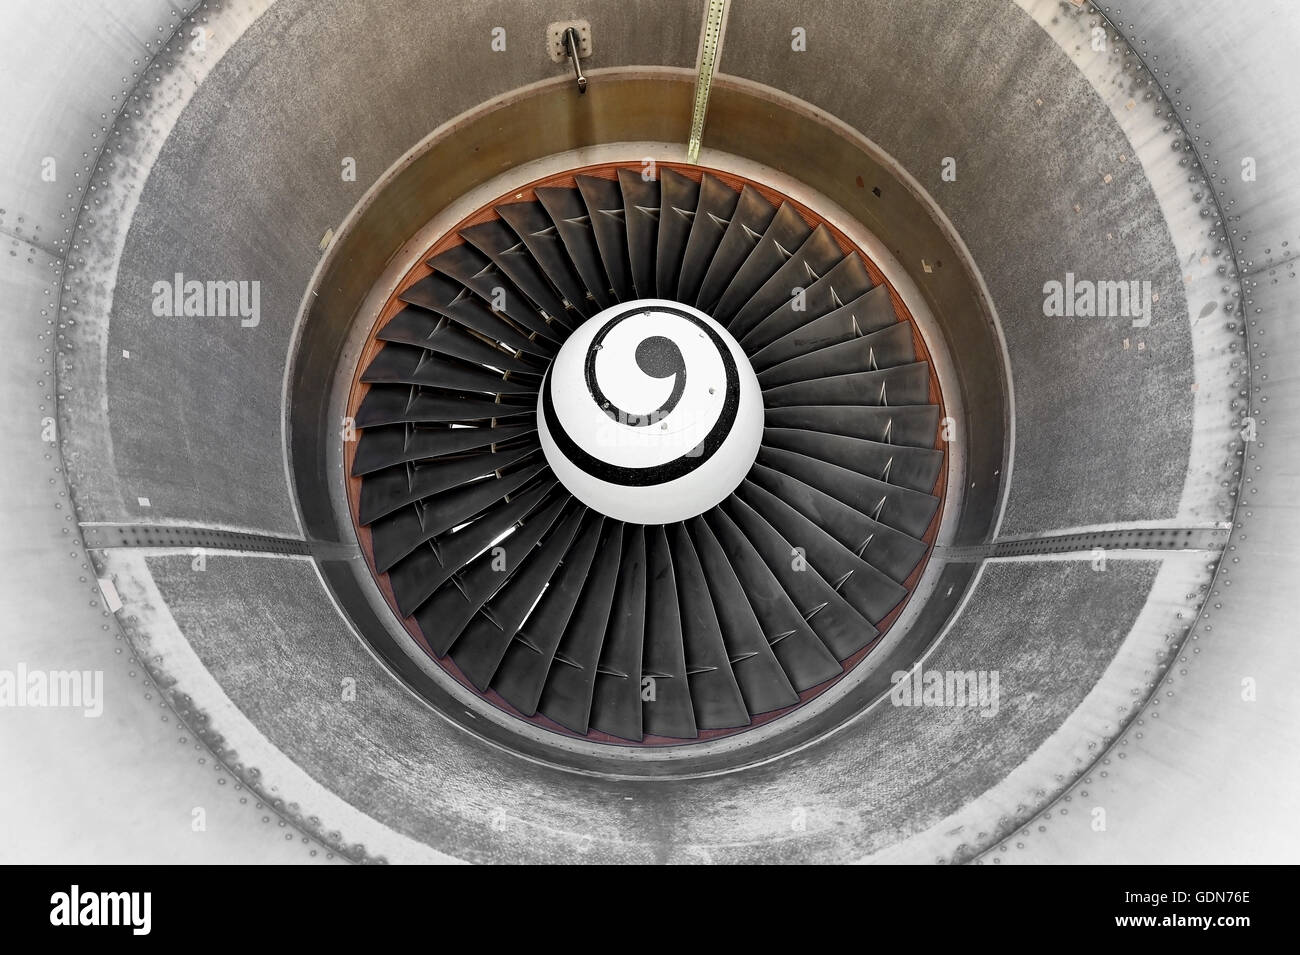 Detail with big propeller inside airplane engine housing Stock Photo